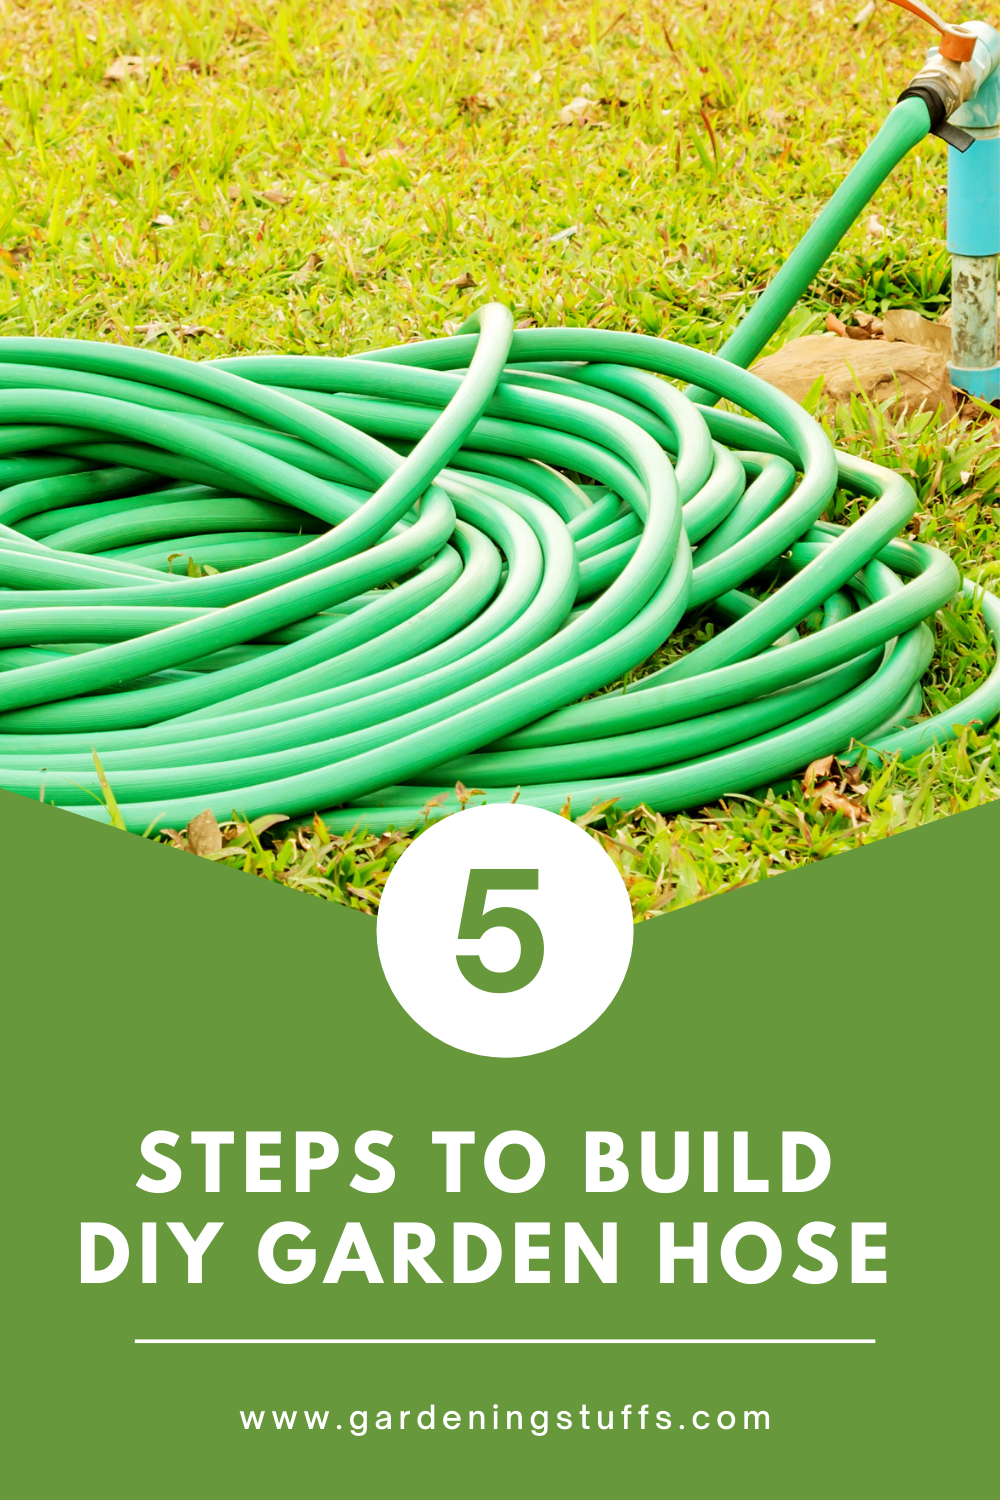 If you want to  build your own DIY garden hose to meet your custom garden requirements. Check out these 5 easy steps on how to build a garden hose.